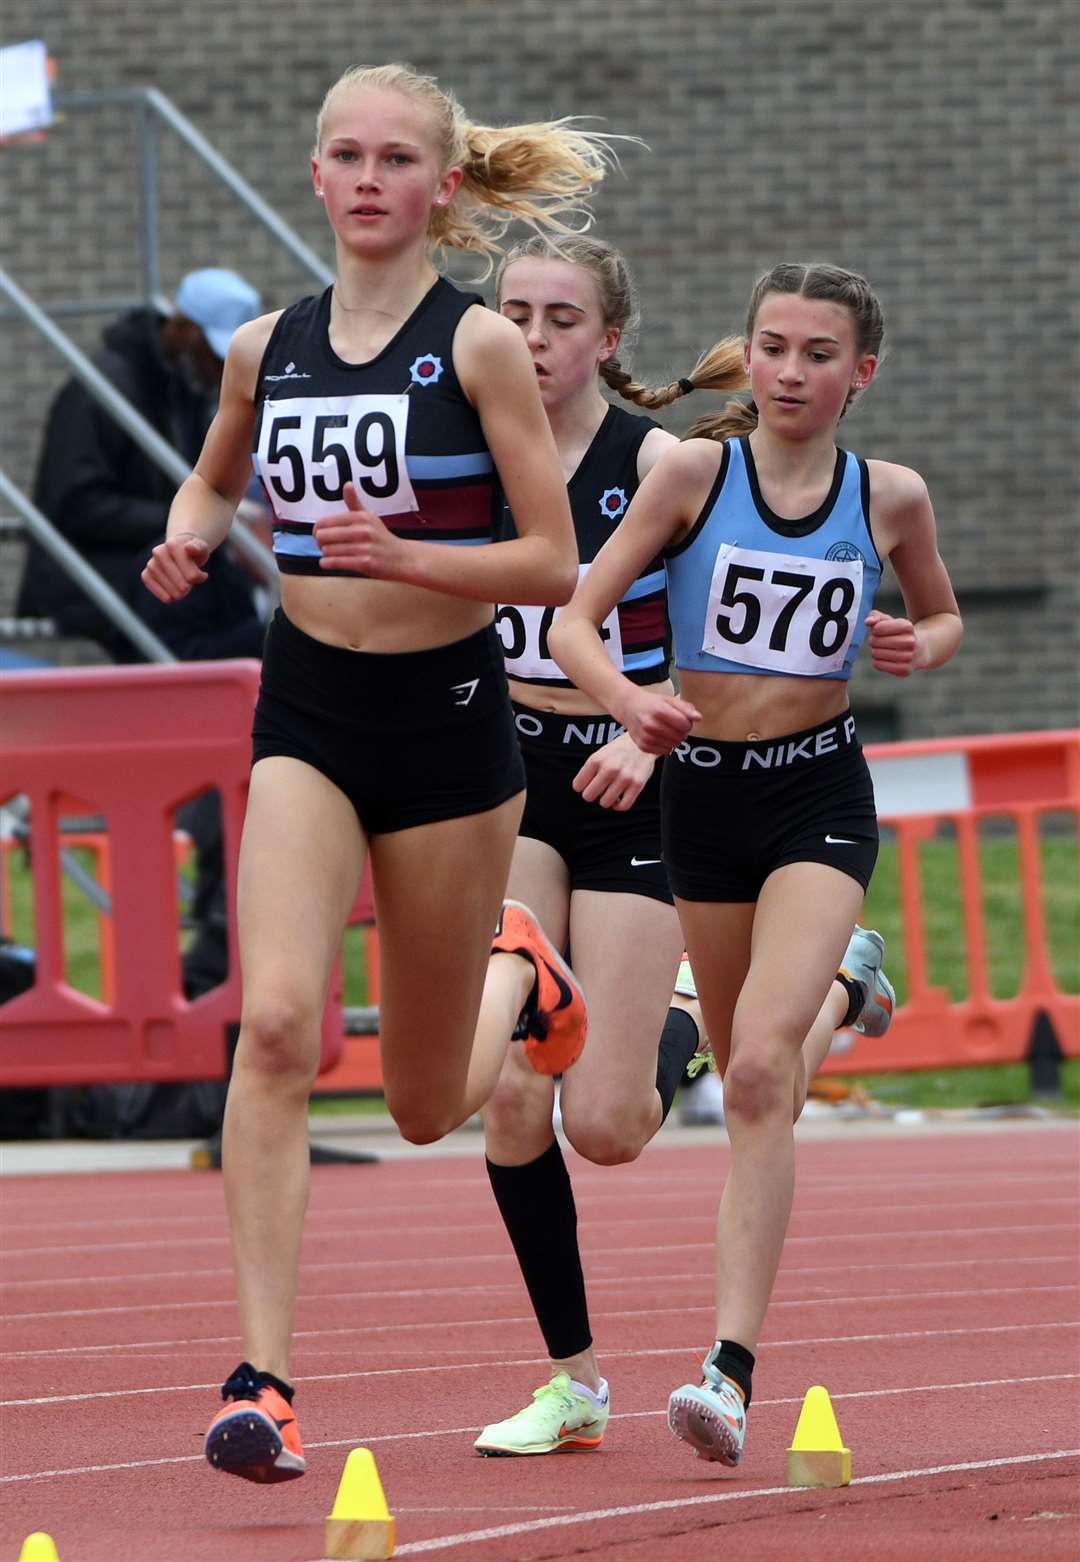 The under-15 girls' 1,500m champion Megan Barlow (No.559, Blackheath & Bromley Harriers) sets the pace. Picture: Barry Goodwin (56698992)